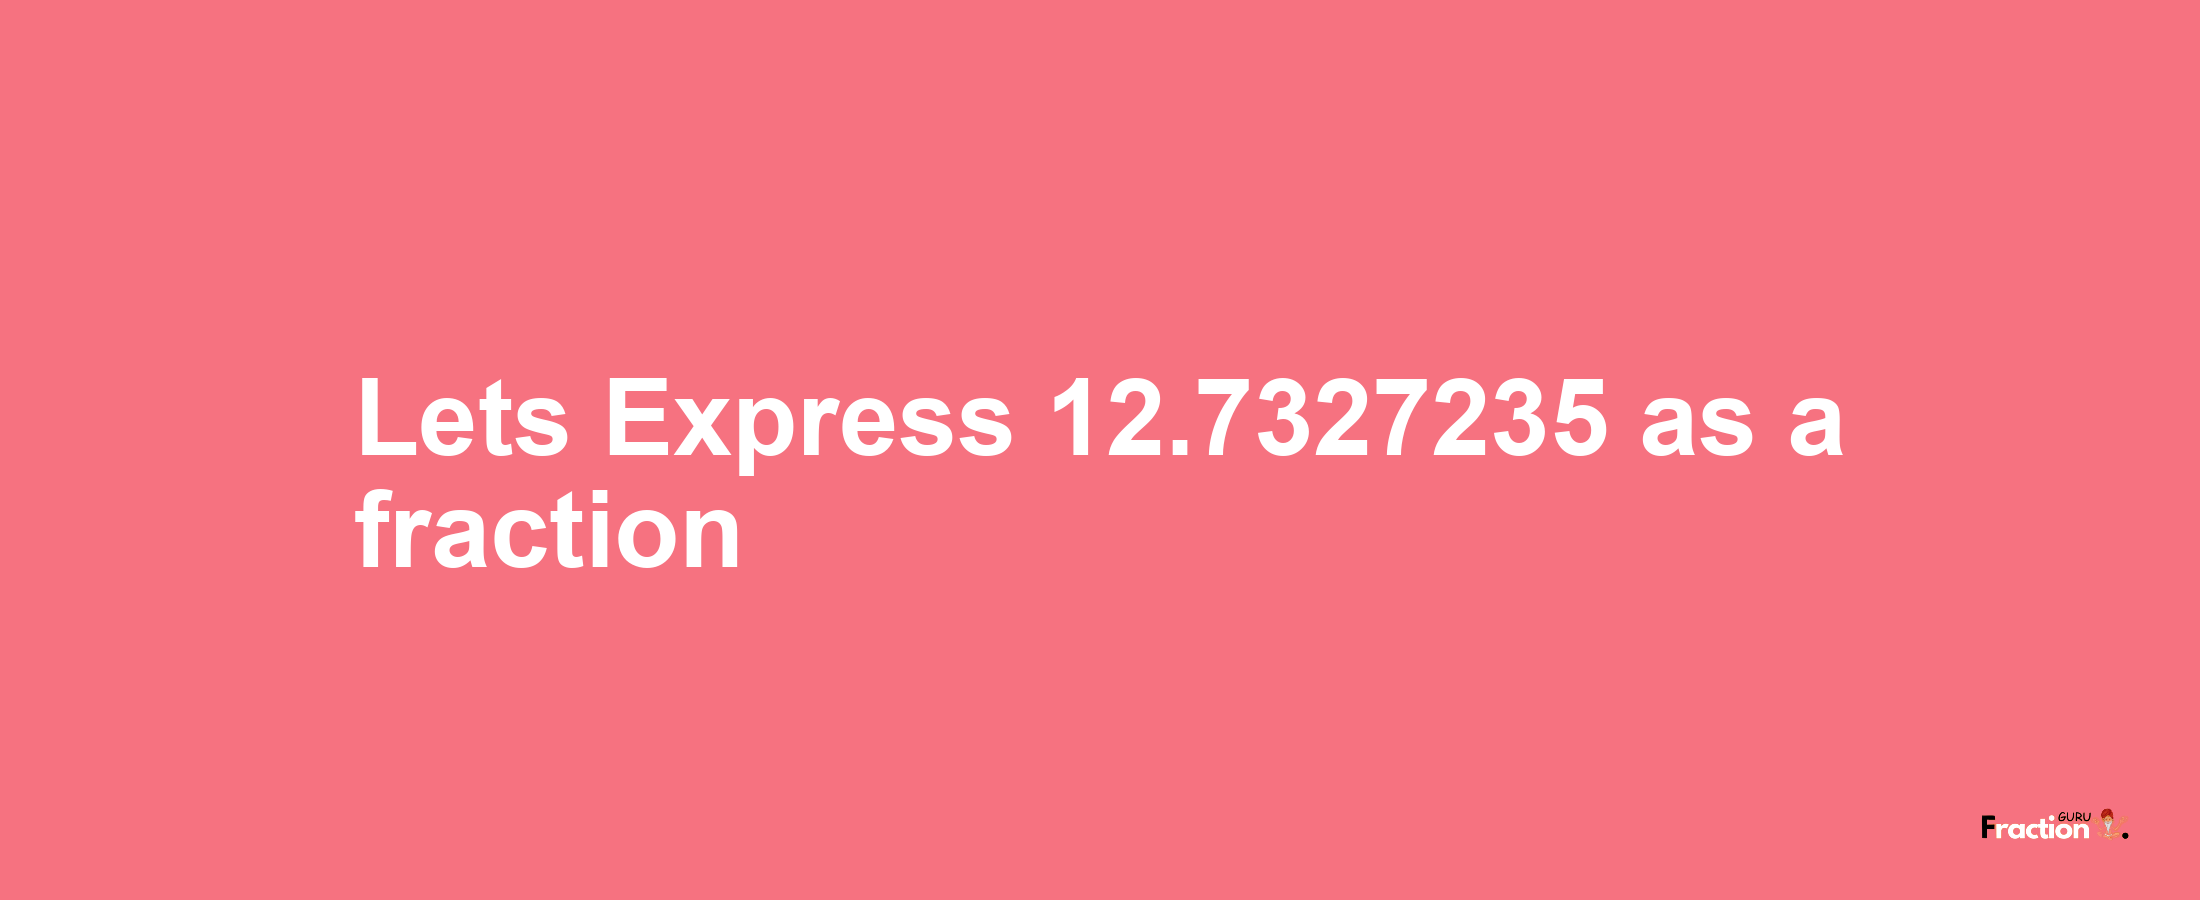 Lets Express 12.7327235 as afraction